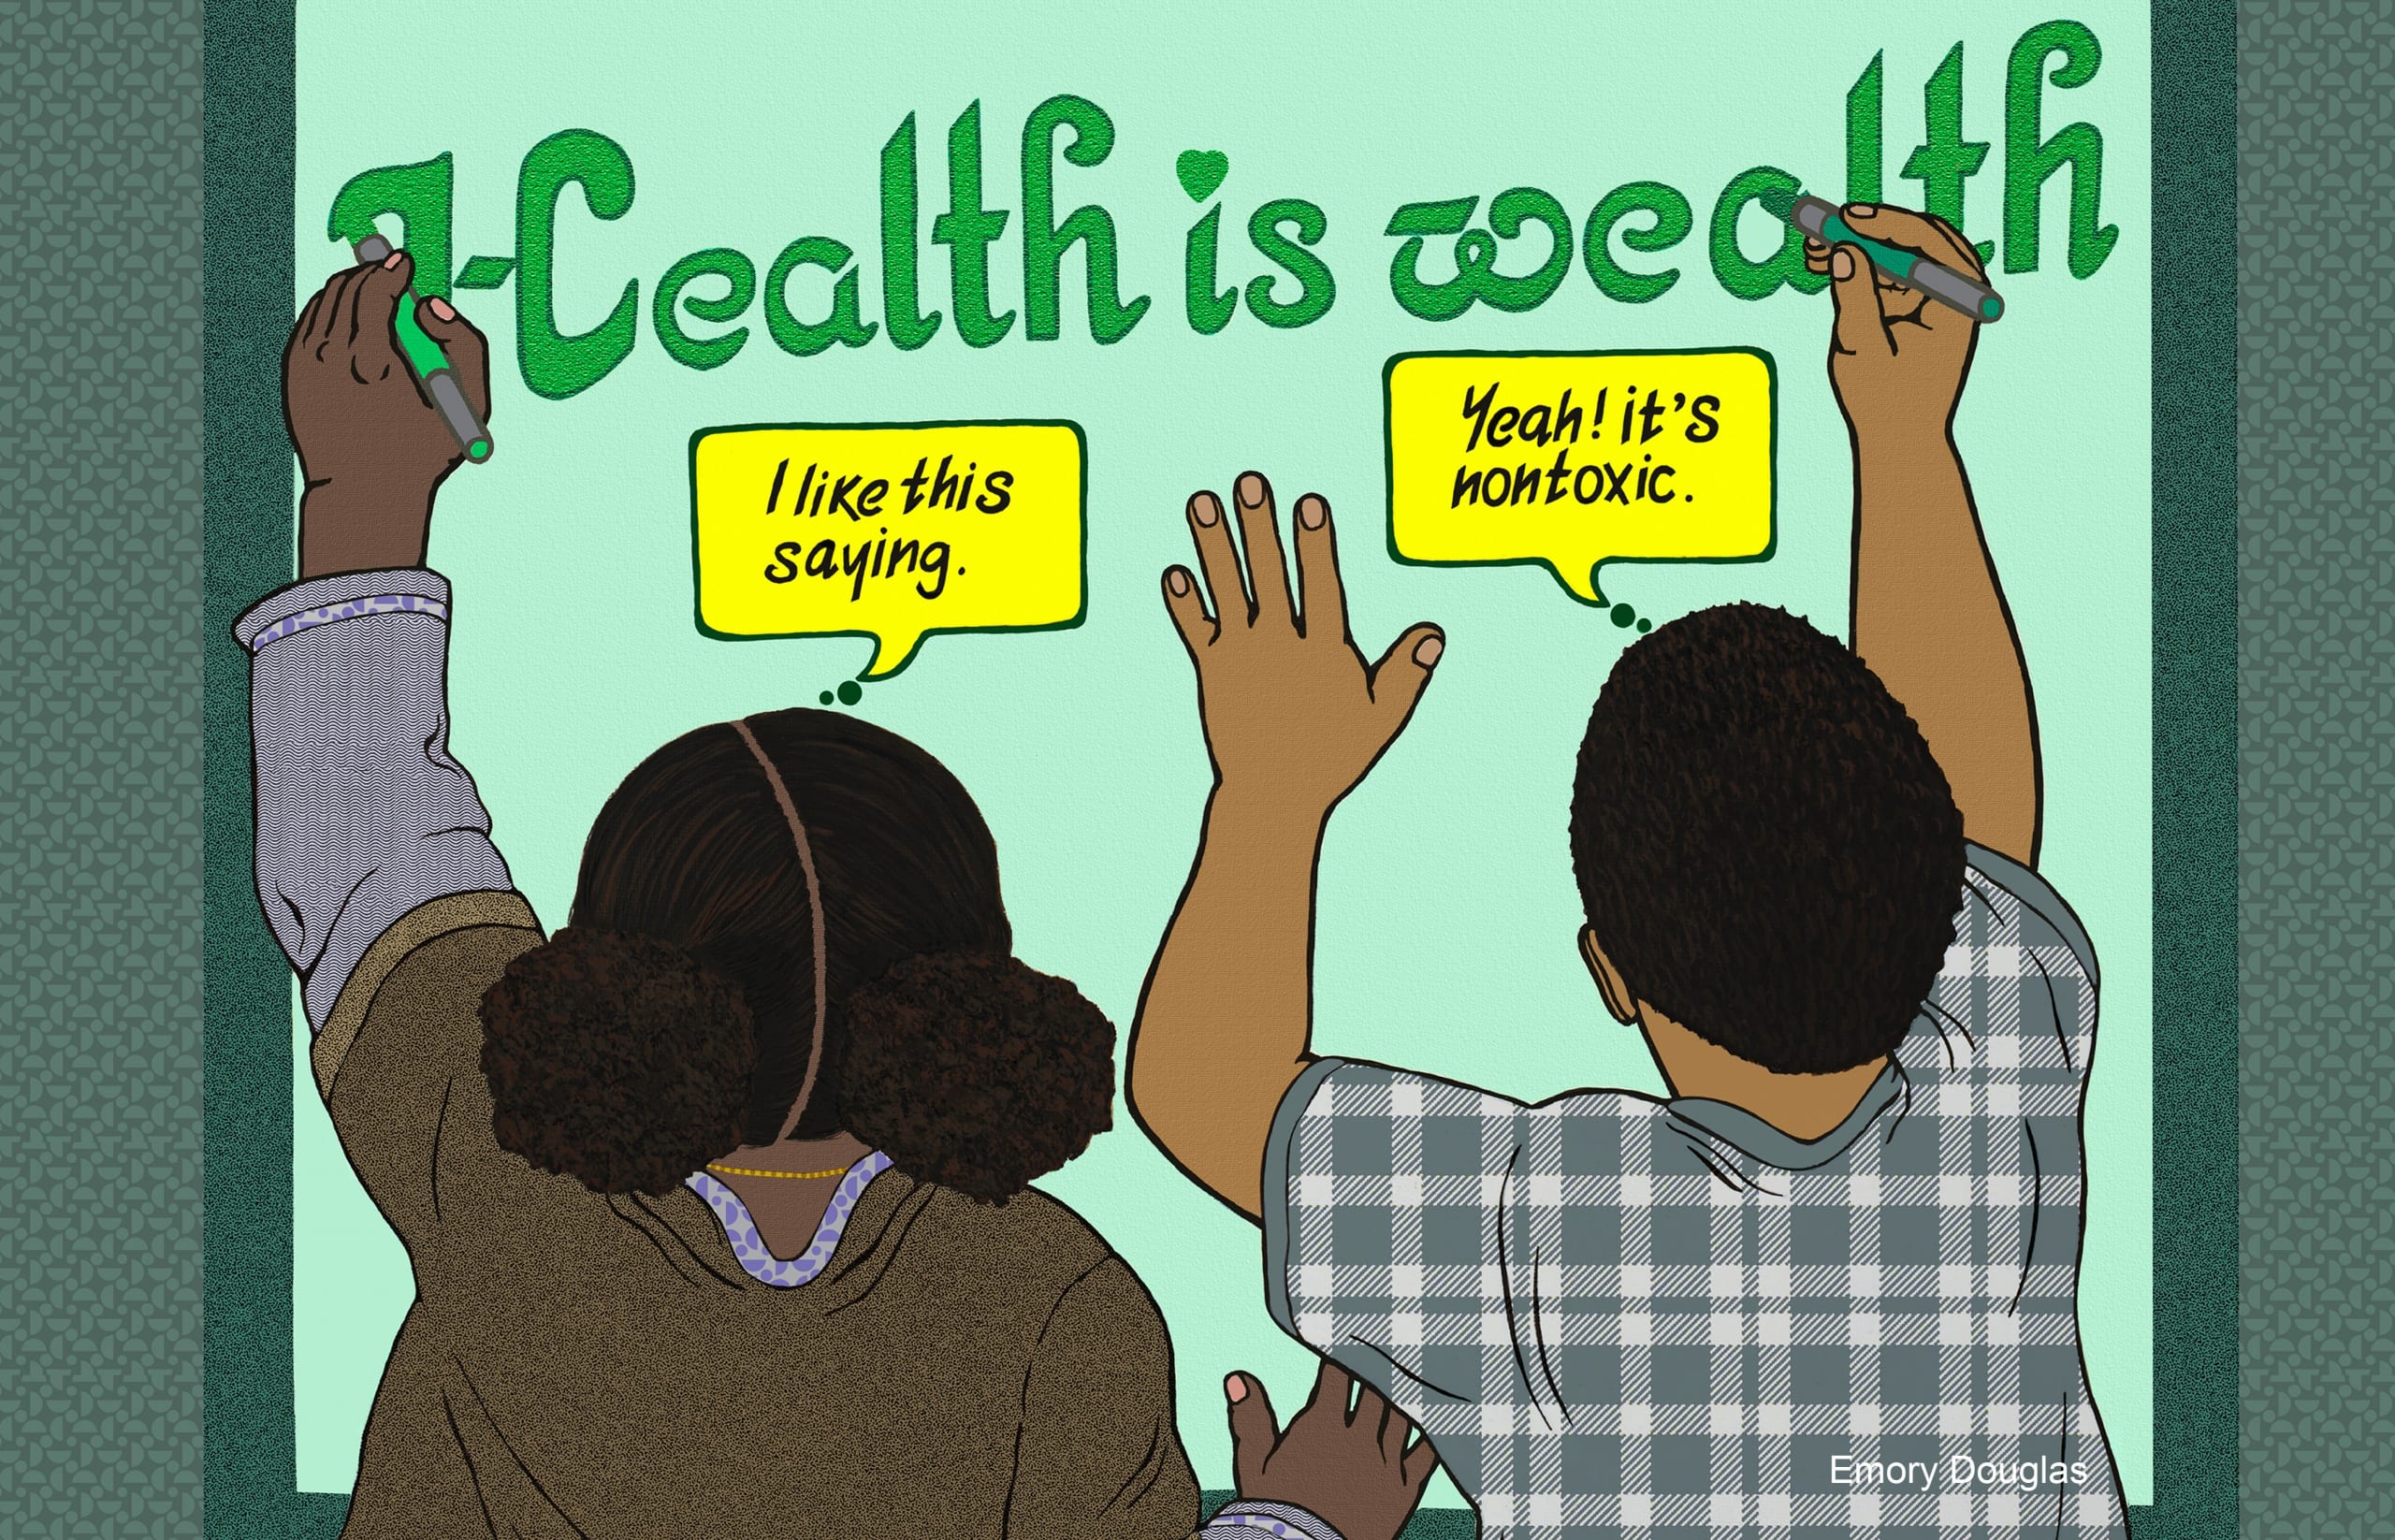 Color drawing that shows two children from behind drawing the phrase "Health is wealth" onto a surface in front of them.The young girl on the left says "I like this saying," the young boy on the right answers "Yeah! It's nontoxic."